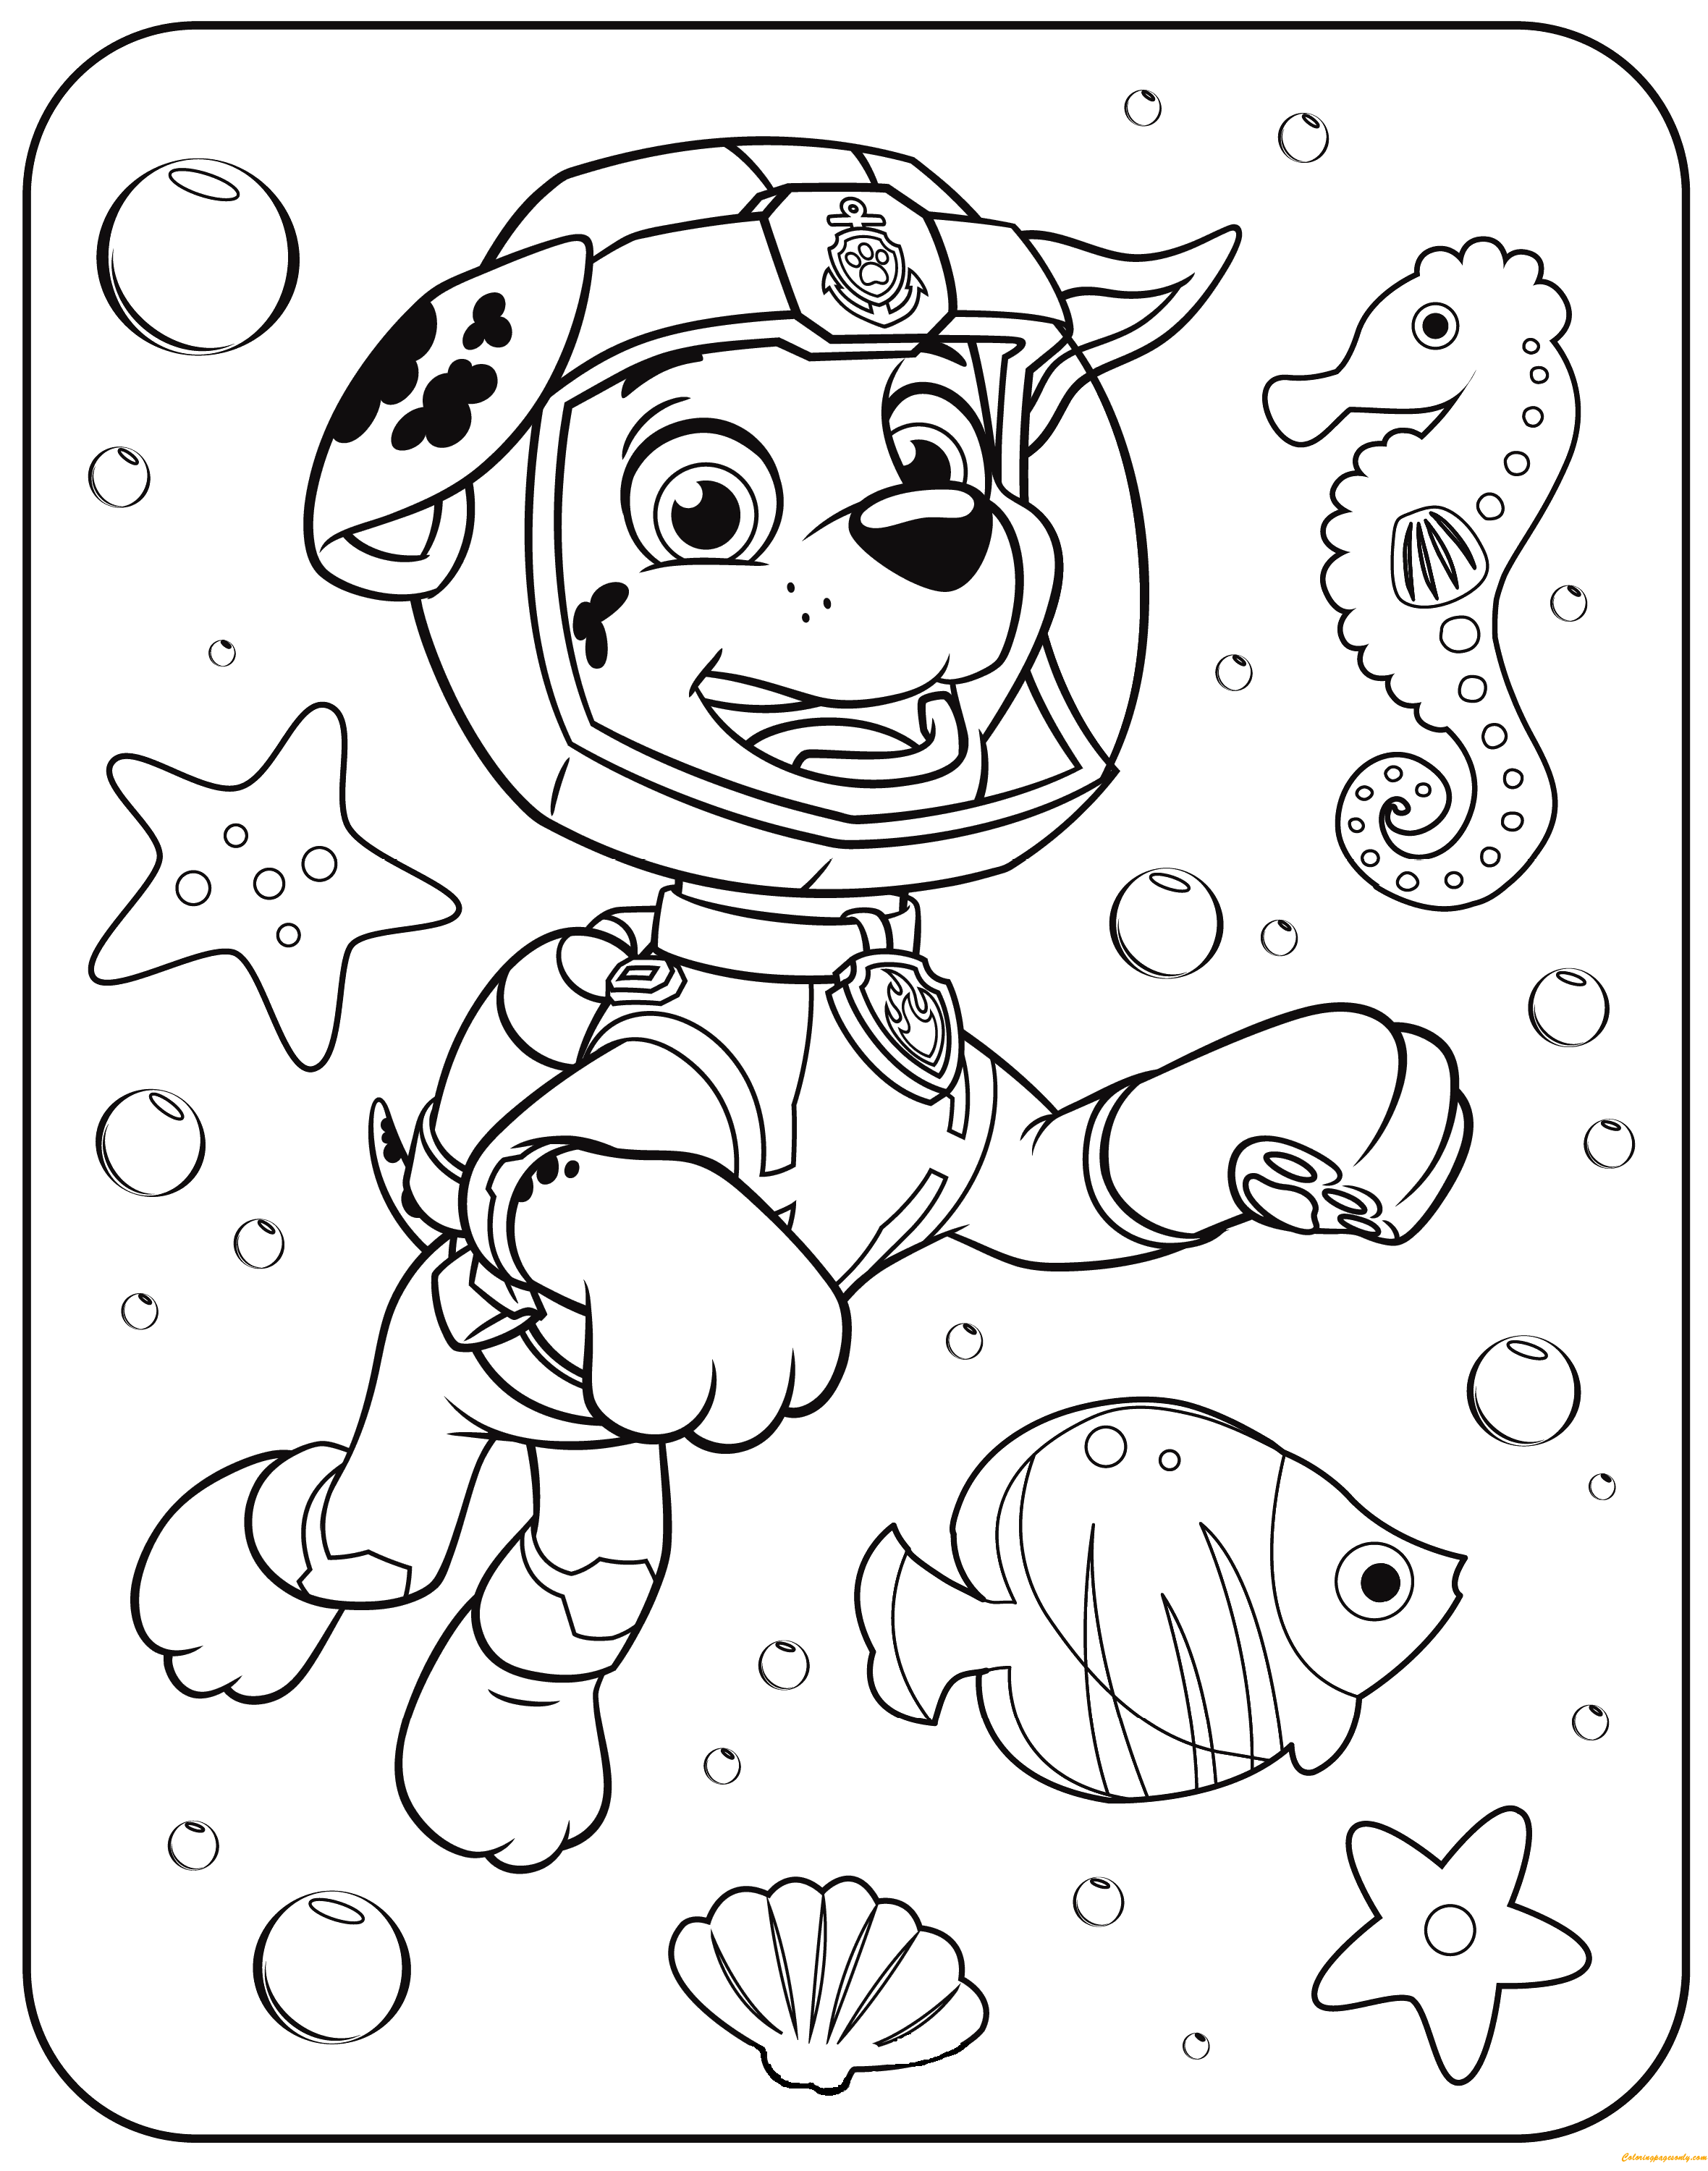 Paw Patrol Marshall Underwater Coloring Page - Free Coloring Pages ...